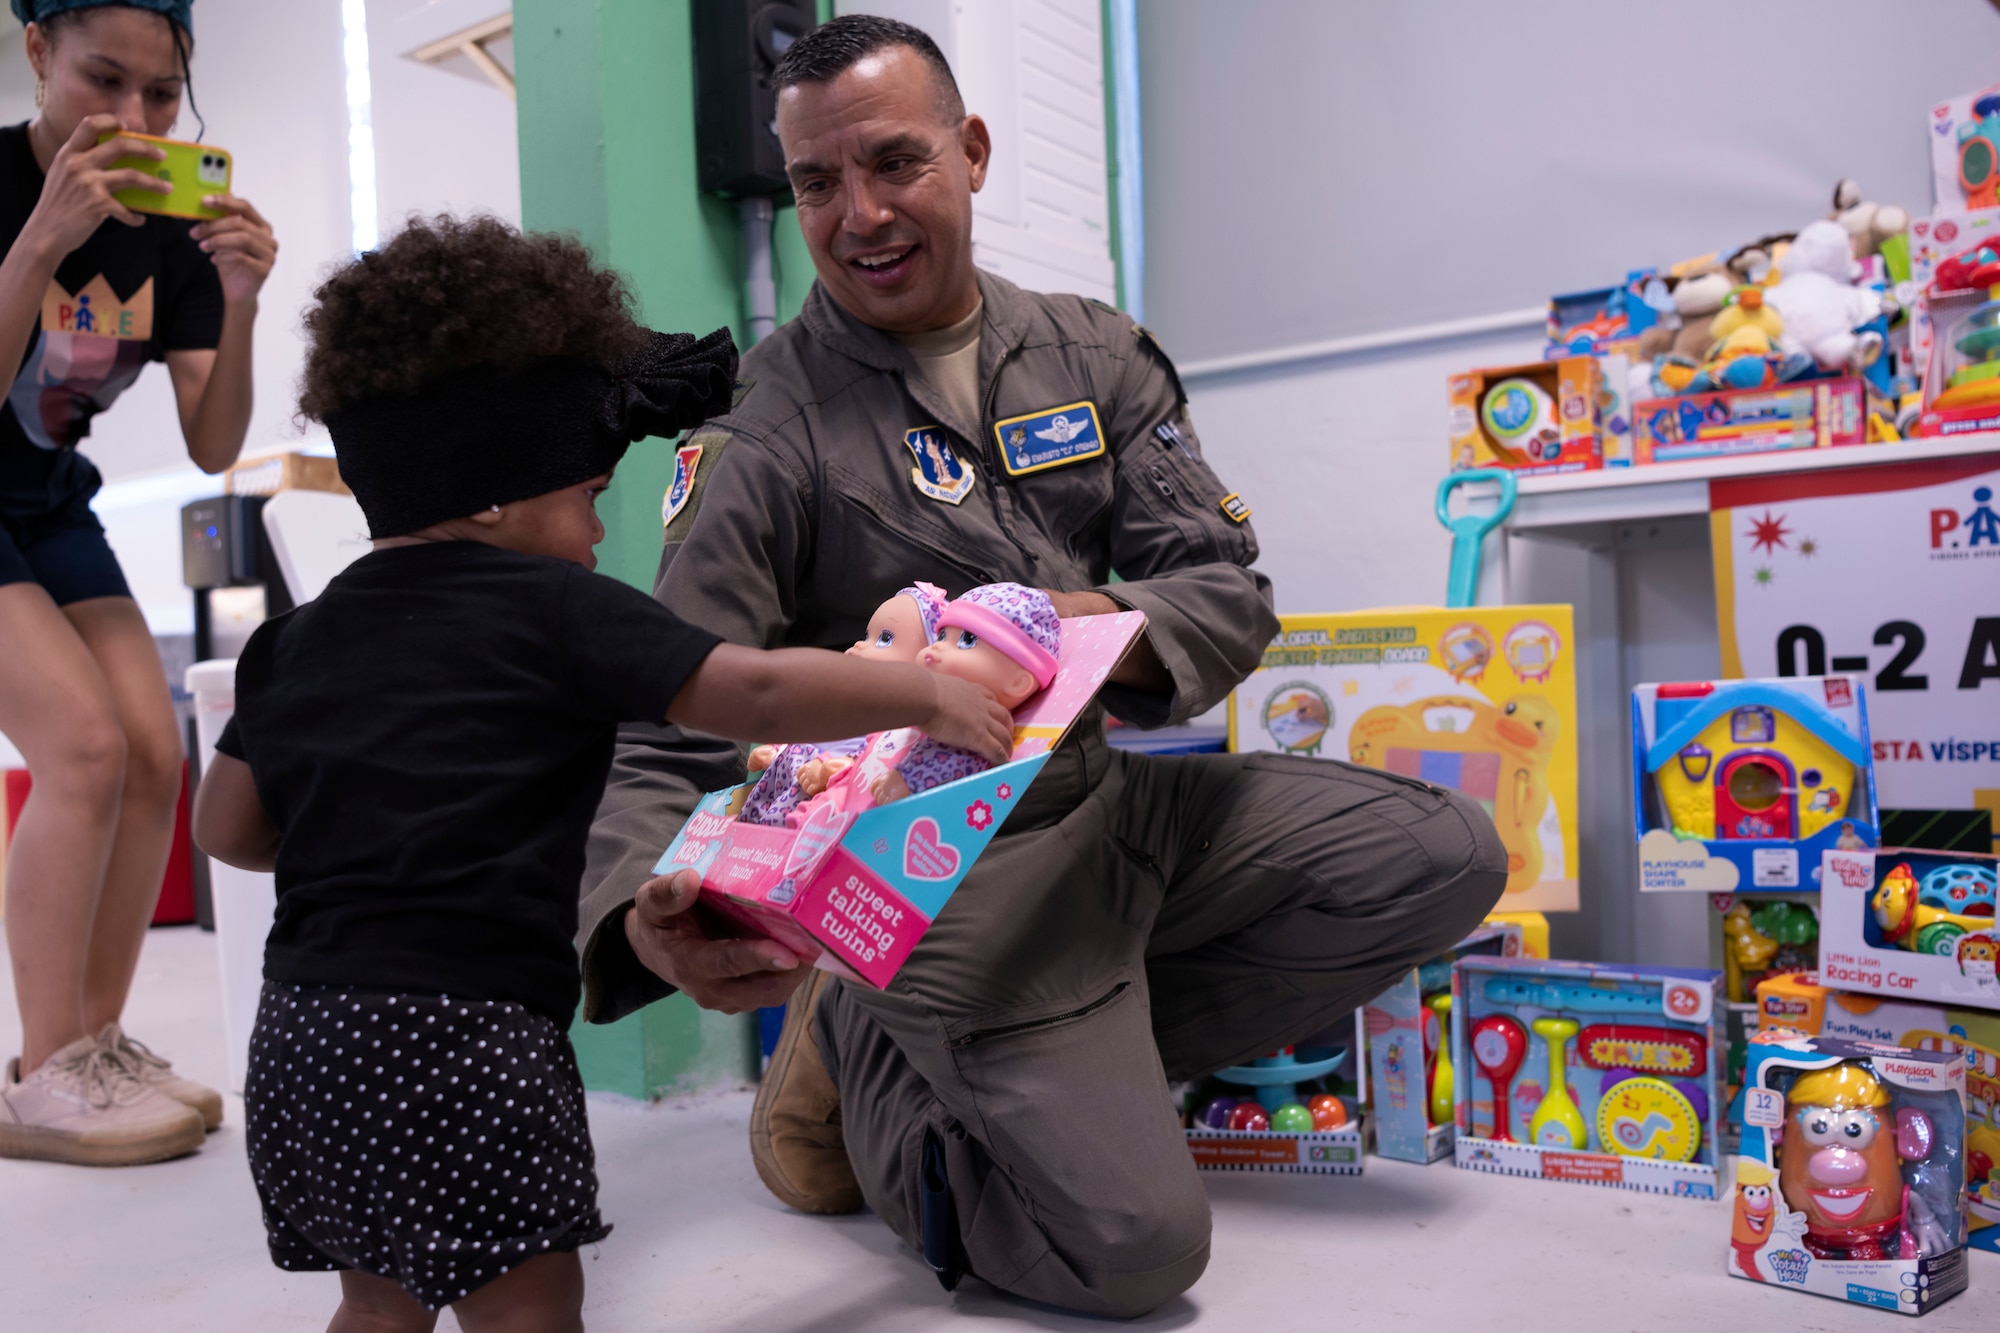 U.S. Air Force Col. Evaristo Orengo III., the 156th Wing commander, Puerto Rico Air National Guard, delivers a gift  to a child during a Three Kings eve event at Loiza, Puerto Rico, Jan. 5, 2024. For 48 consecutive years, the PRANG has honored a Puerto Rican tradition, Three Kings Day, by impacting the Piñones community through a yearly event where the 156th Wing Chiefs Council and U.S. Airmen partnered with local non-profit organizations to impact hundreds of children with ages ranging from newborn to 12-years-old, during the eve of Three Kings Day.(U.S. Air National Guard photo by Airman 1st Class Sharymel Montalvo Velez)